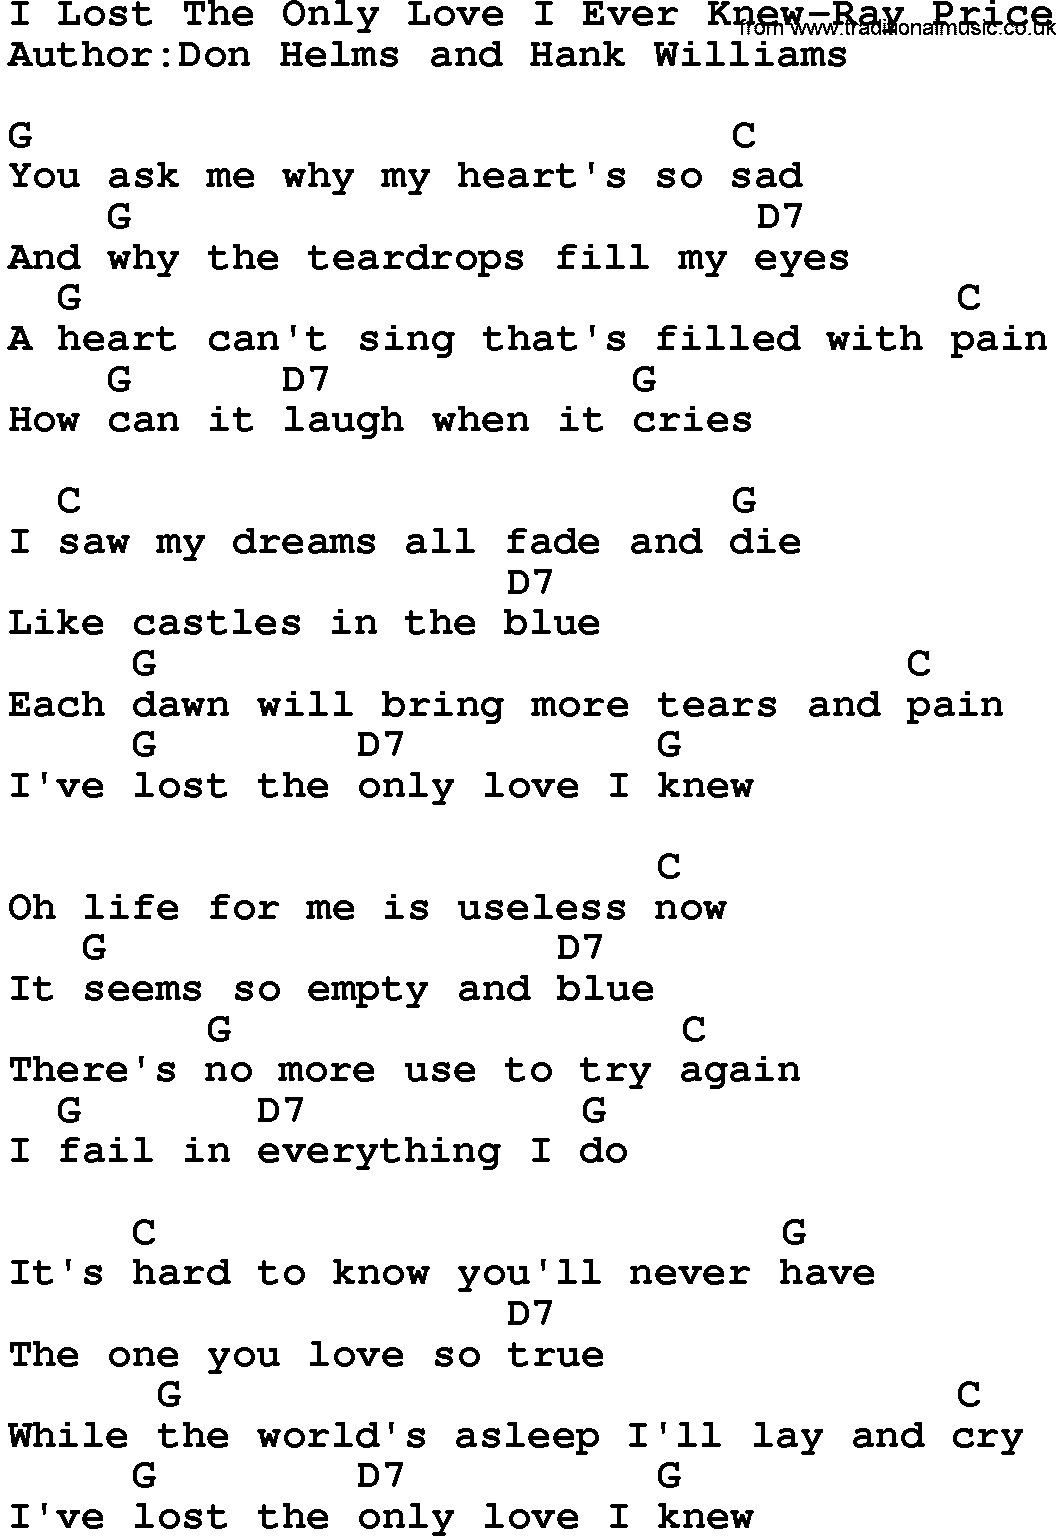 Country music song: I Lost The Only Love I Ever Knew-Ray Price lyrics and chords